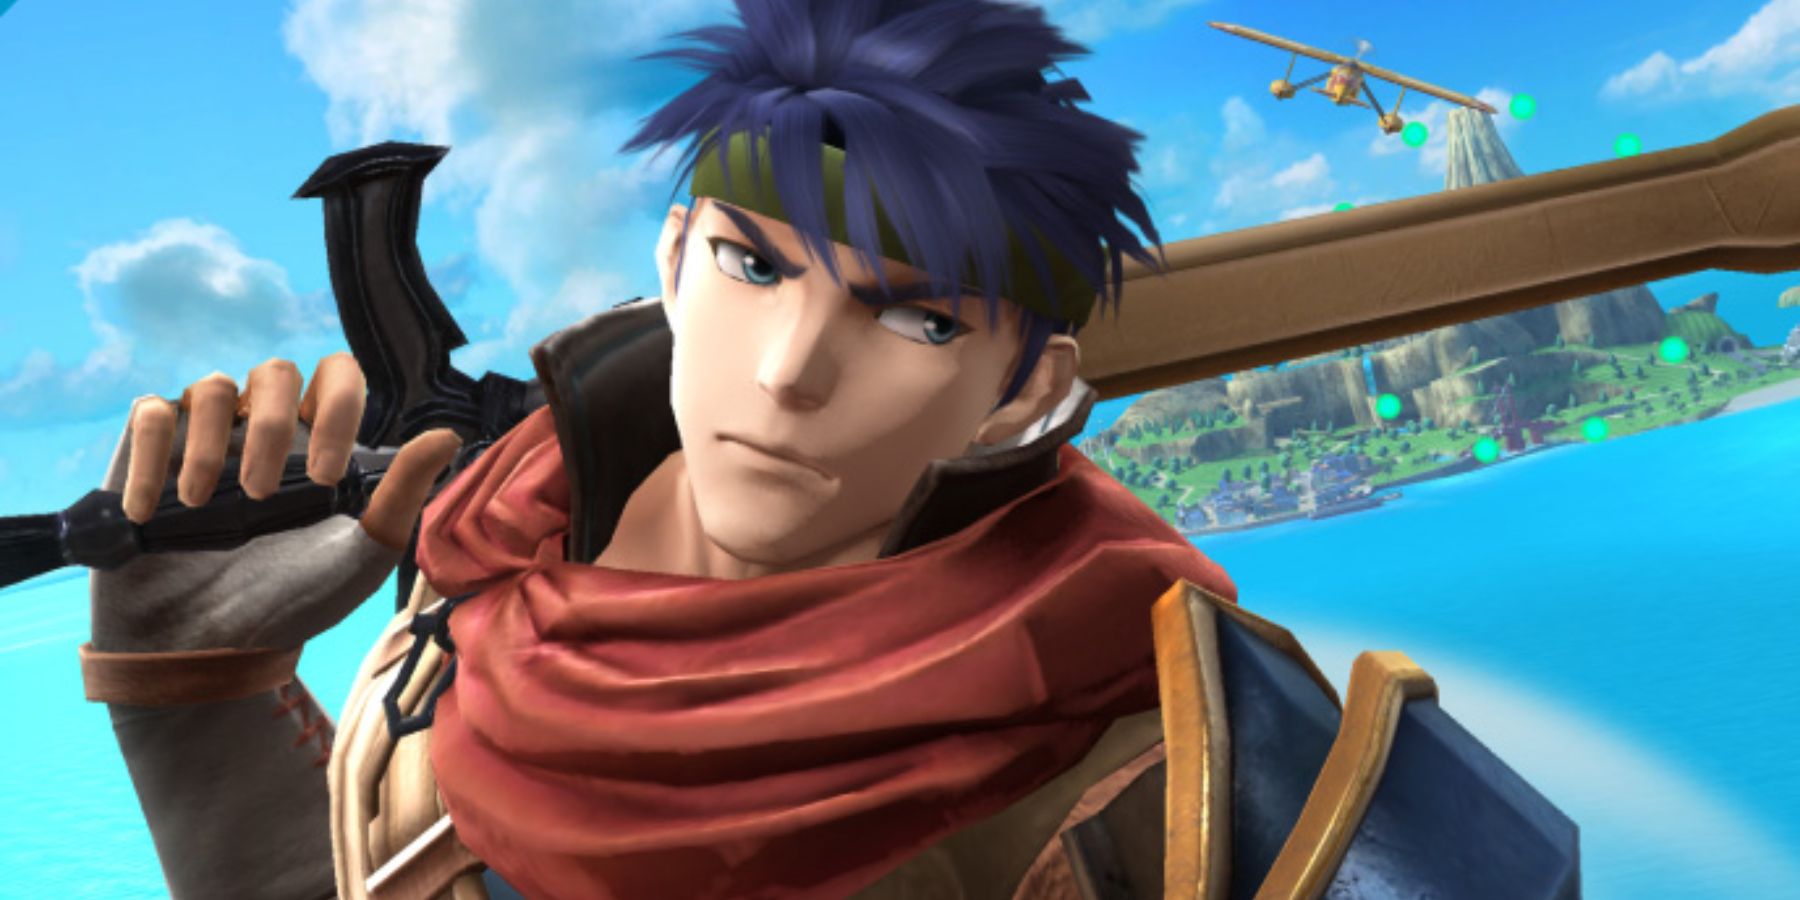 An image of Ike from Super Smash Brothers Ultimate holding his sword.